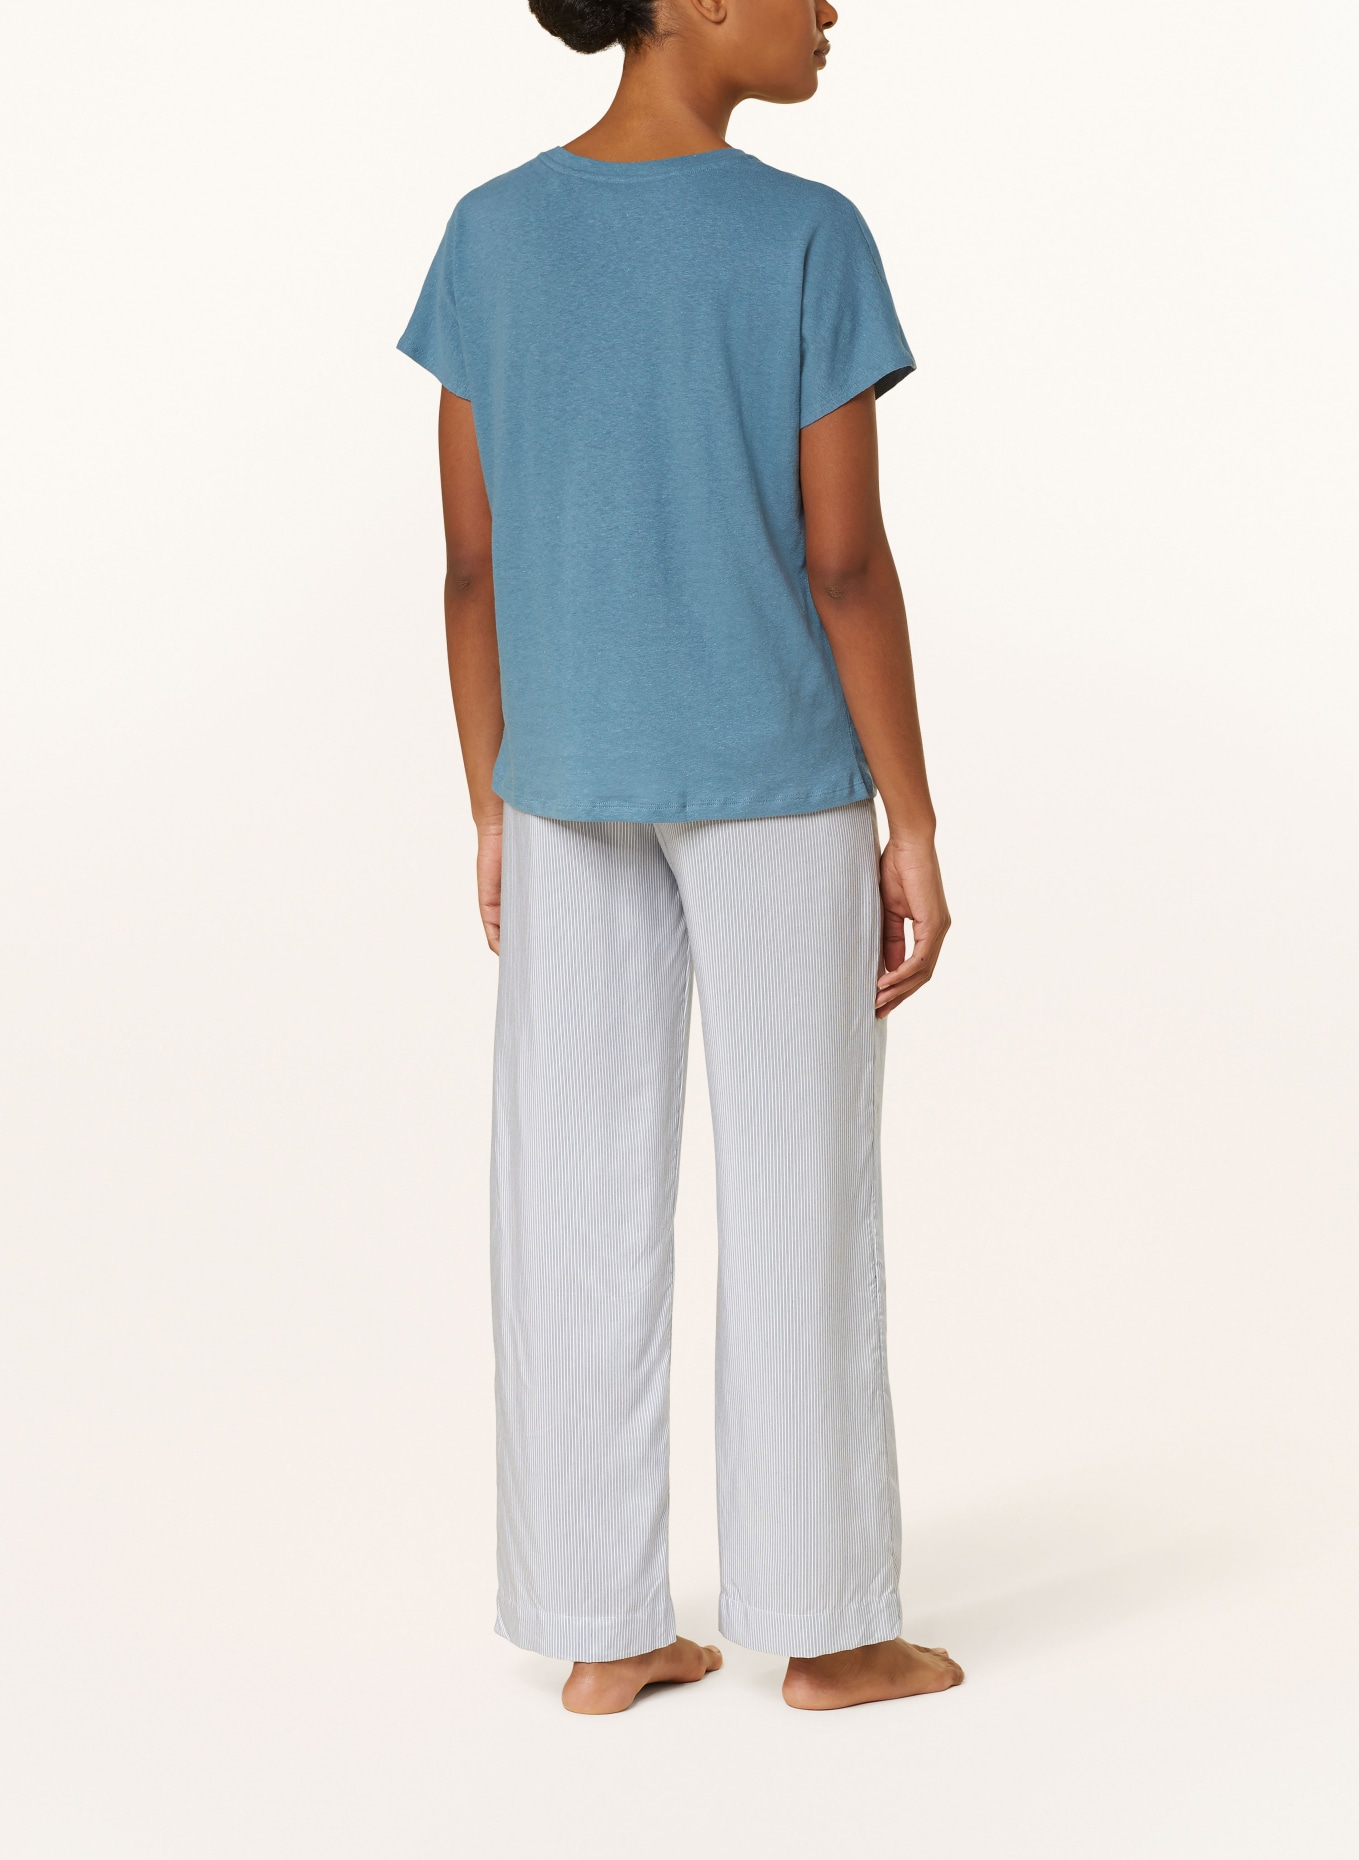 SCHIESSER Pajama shirt MIX + RELAX with linen, Color: BLUE GRAY (Image 3)